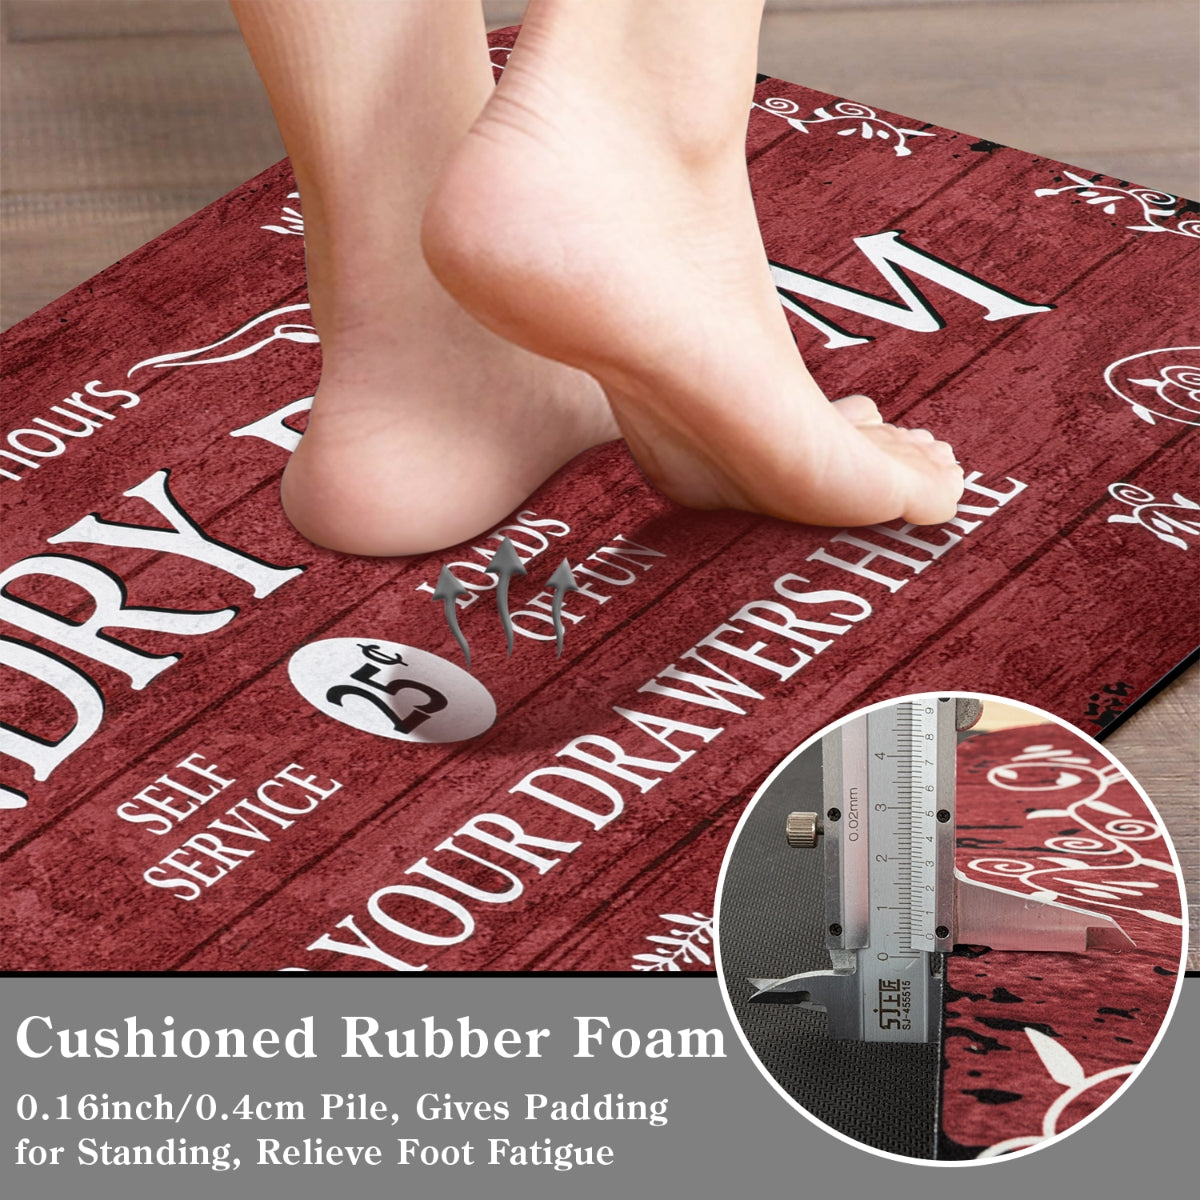 Farmhouse Red Laundry Room Rug and Mat